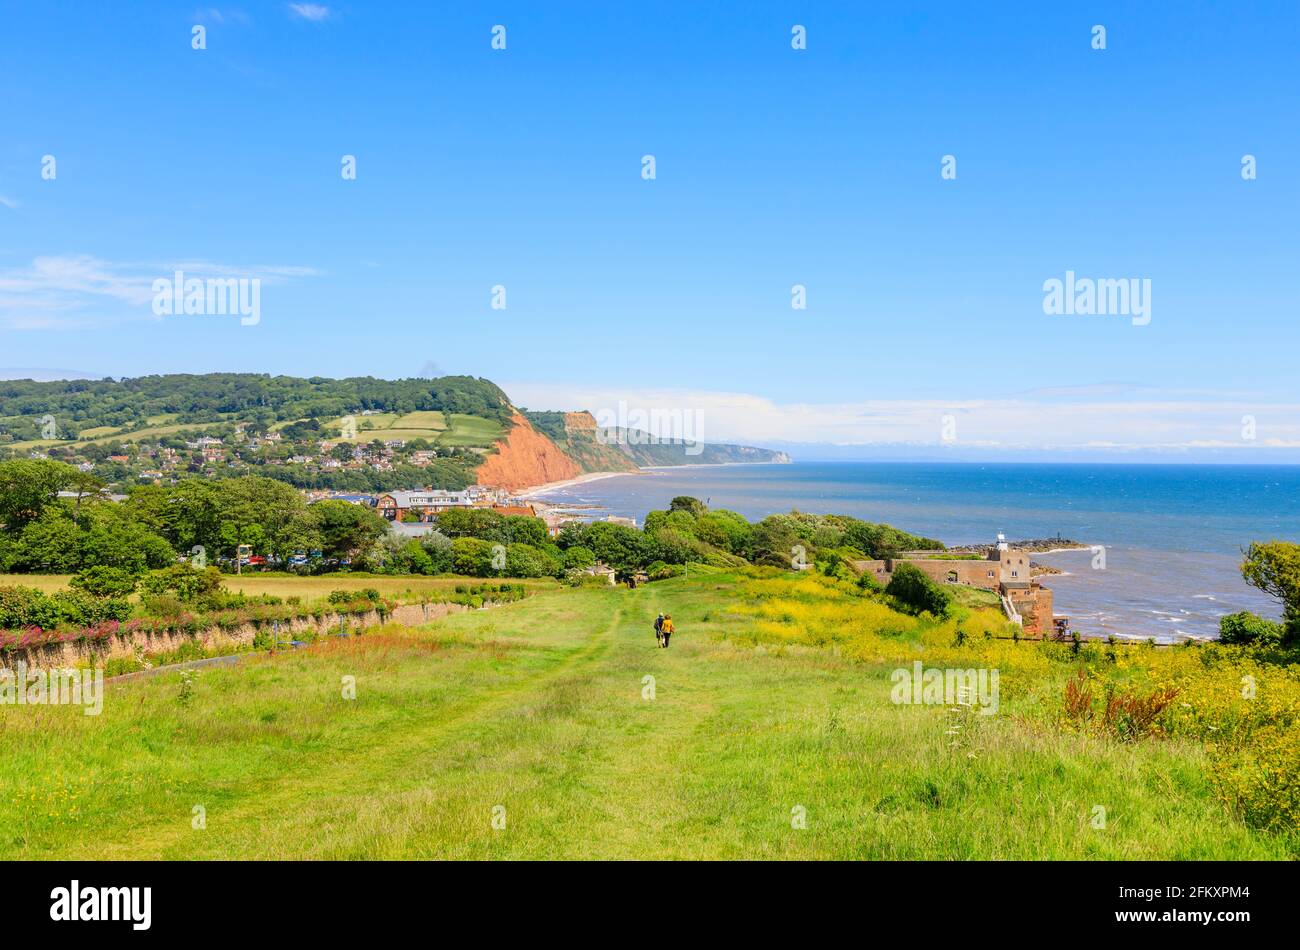 Panoramic view of Salcombe Hill in Sidmouth, a small popular south coast seaside town in Devon, south-west England viewed from Peak Hill (High Peak) Stock Photo